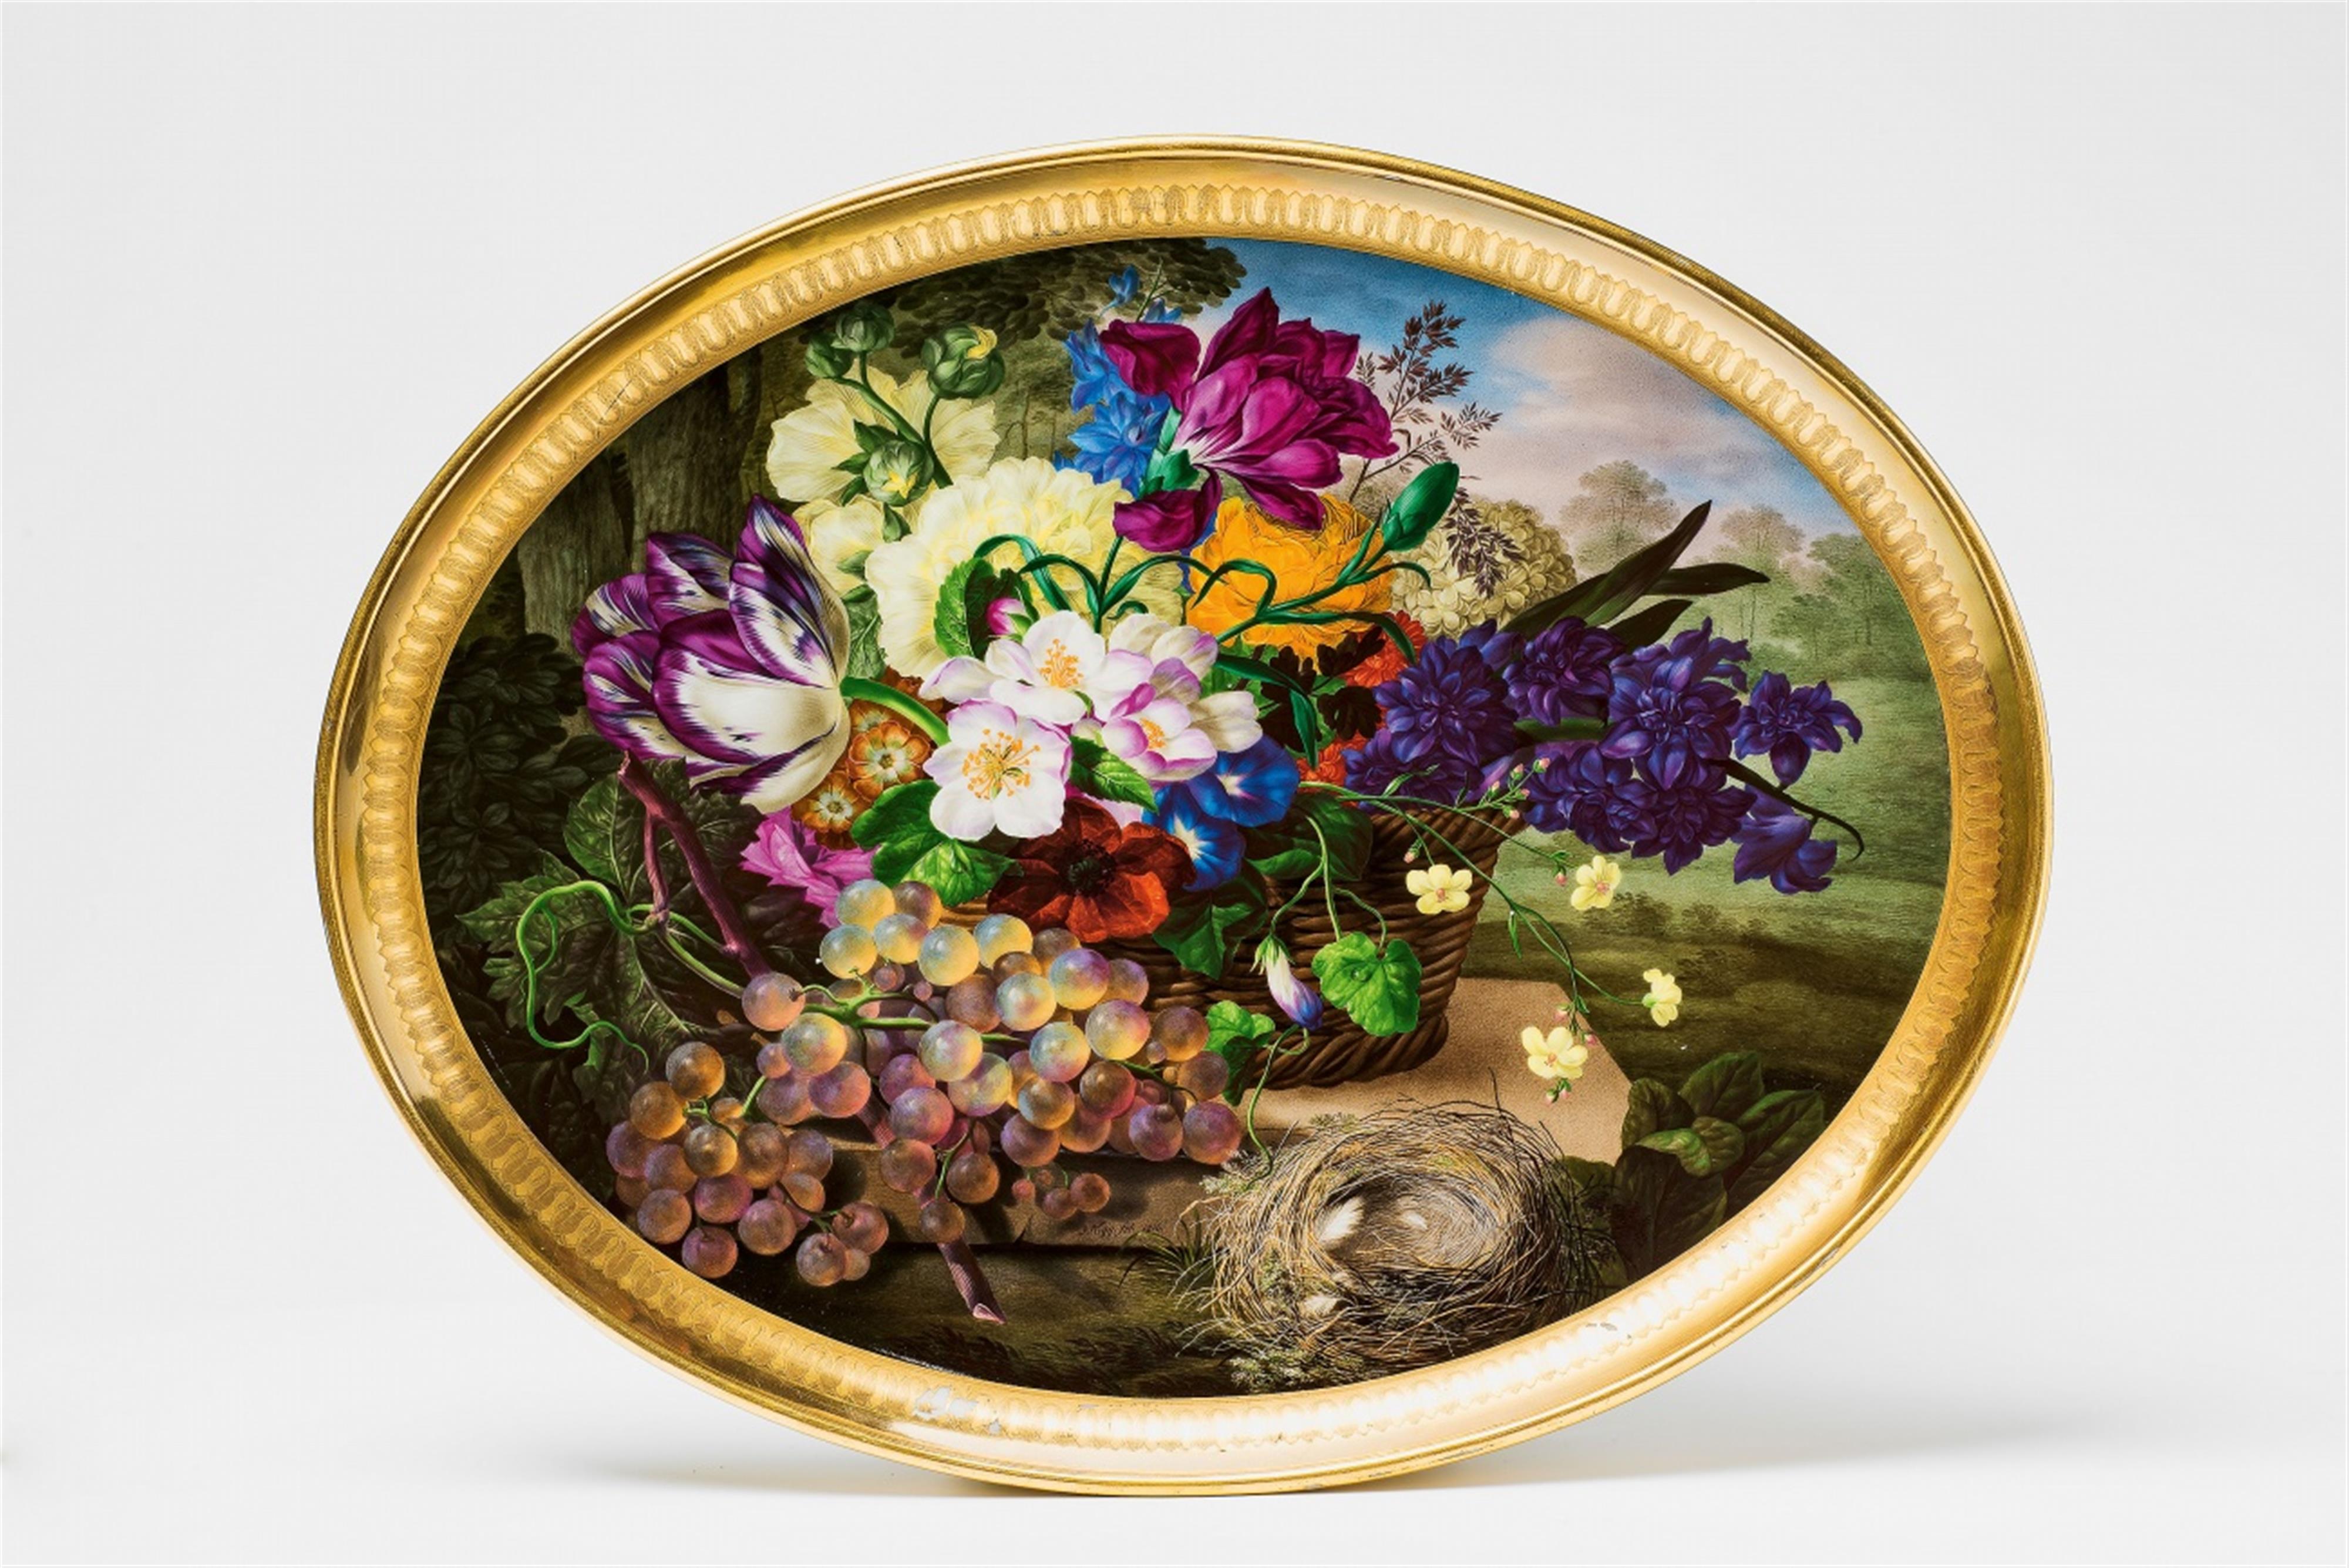 A Vienna porcelain tray with a basket of flowers, grapes, and a bird's nest - 